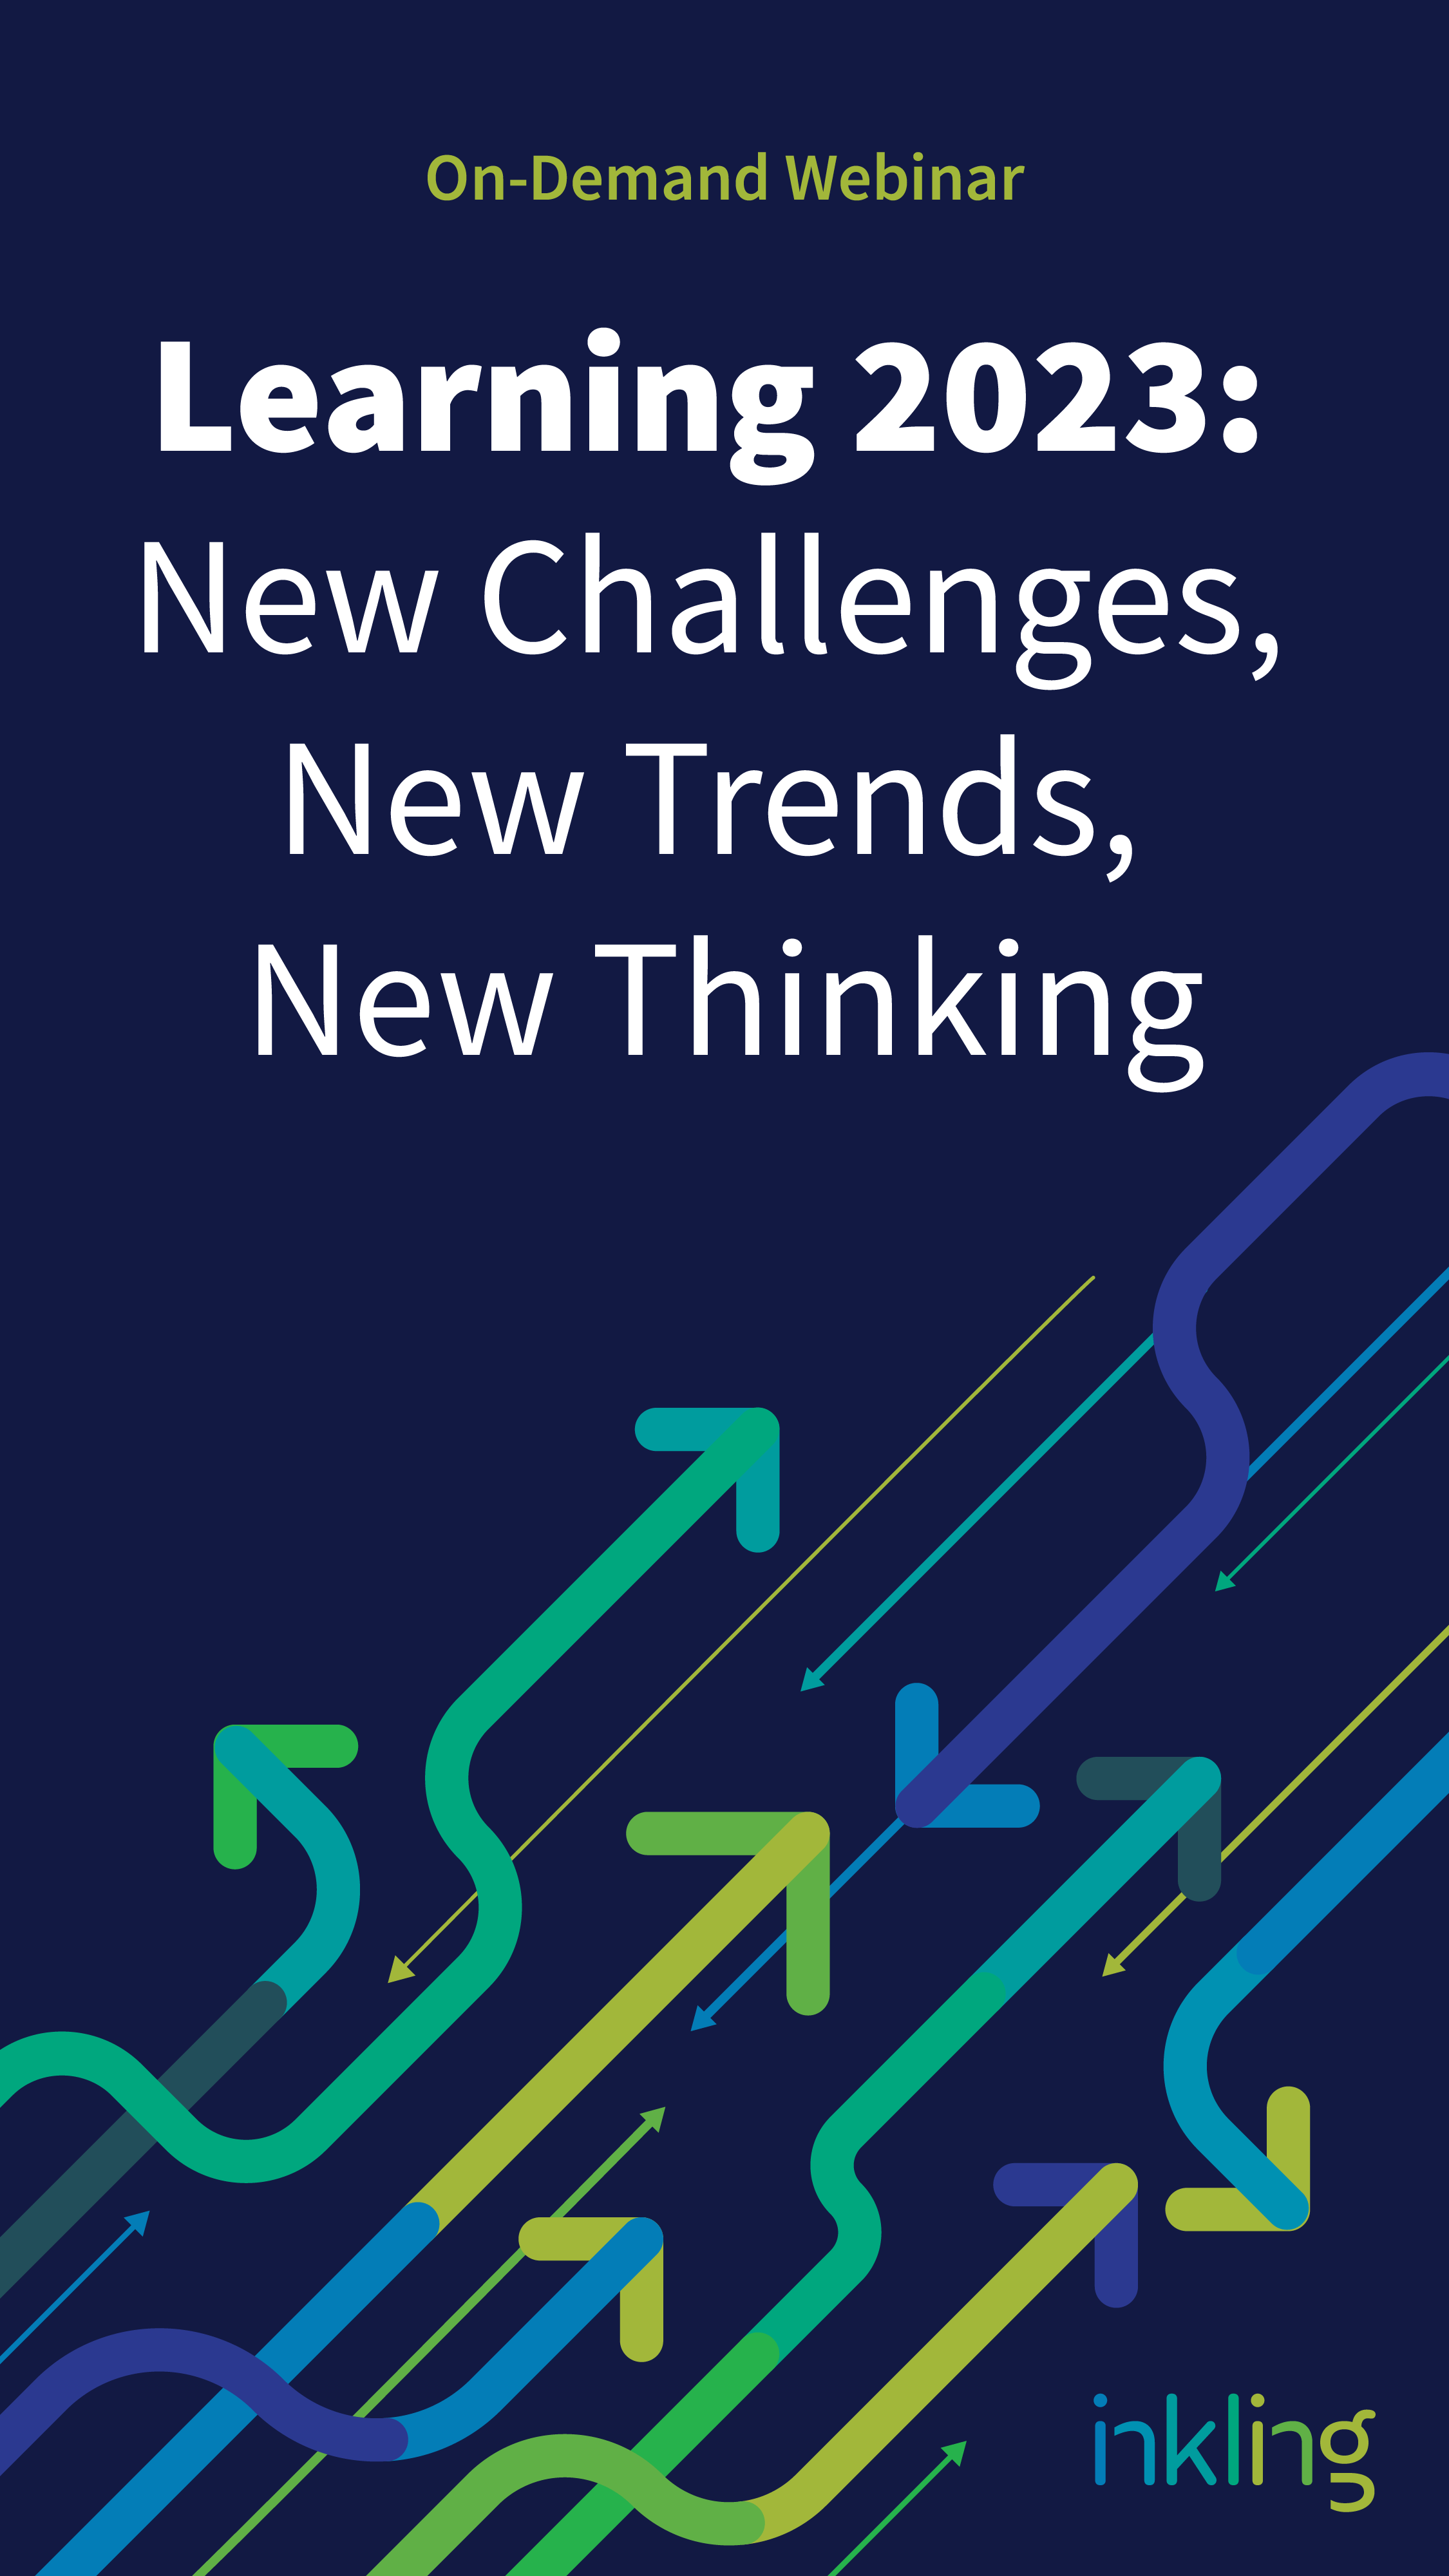 Learning 2023 New Challenges, New Trends, New Thinking webinar